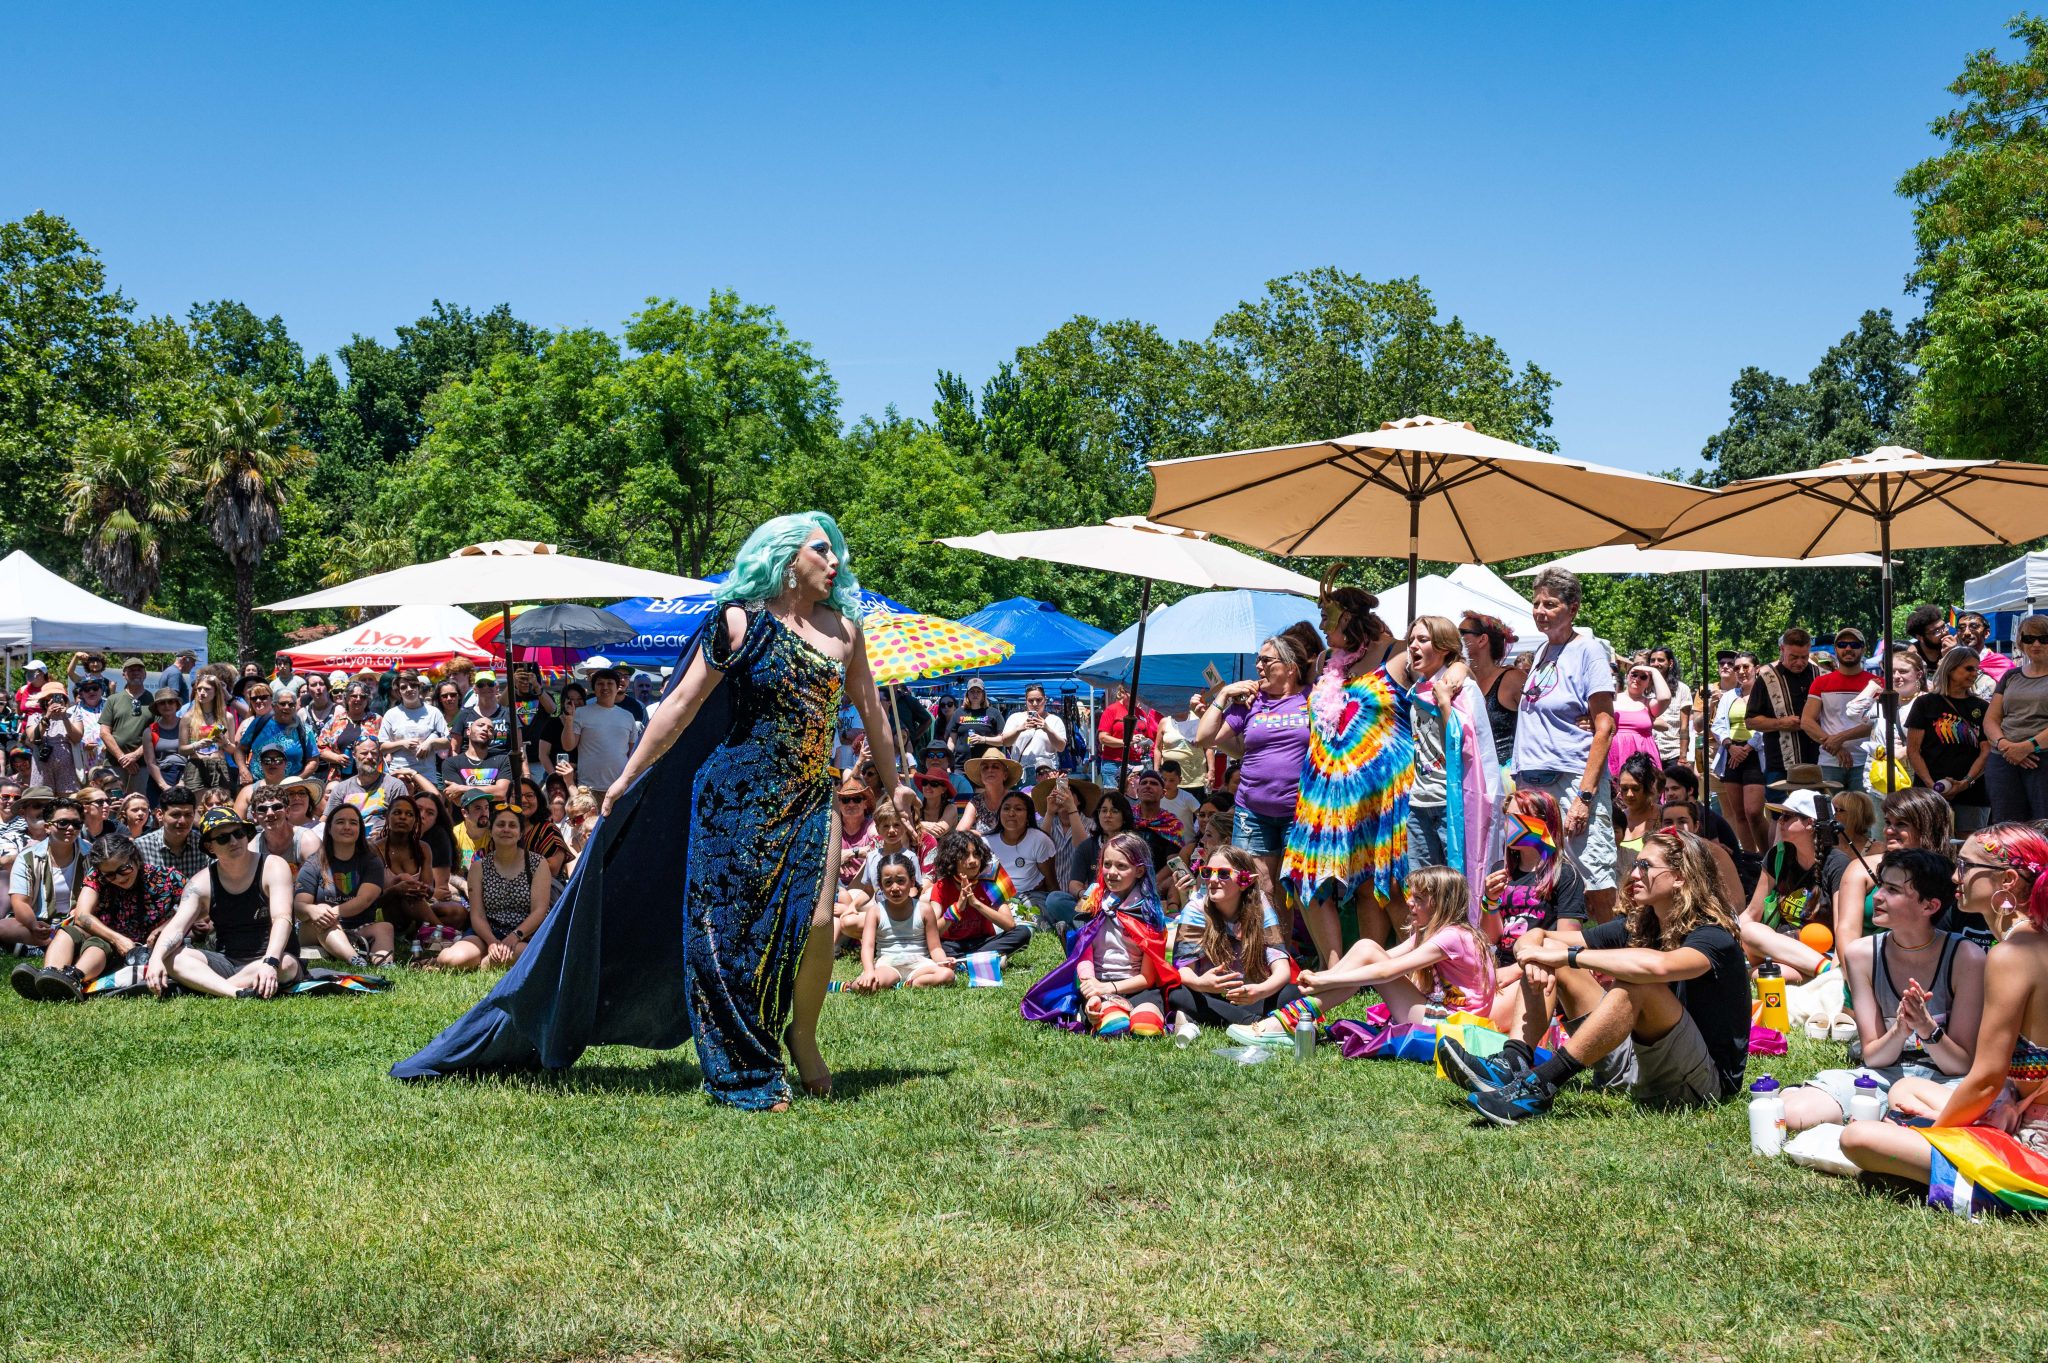 Tilly Creams, performing, crowd, grass, drag queen, davis pride, davis, california, pride month, gay community, event, chris allan, freelance photojournalist, news photography, lgbtq, event, colorful